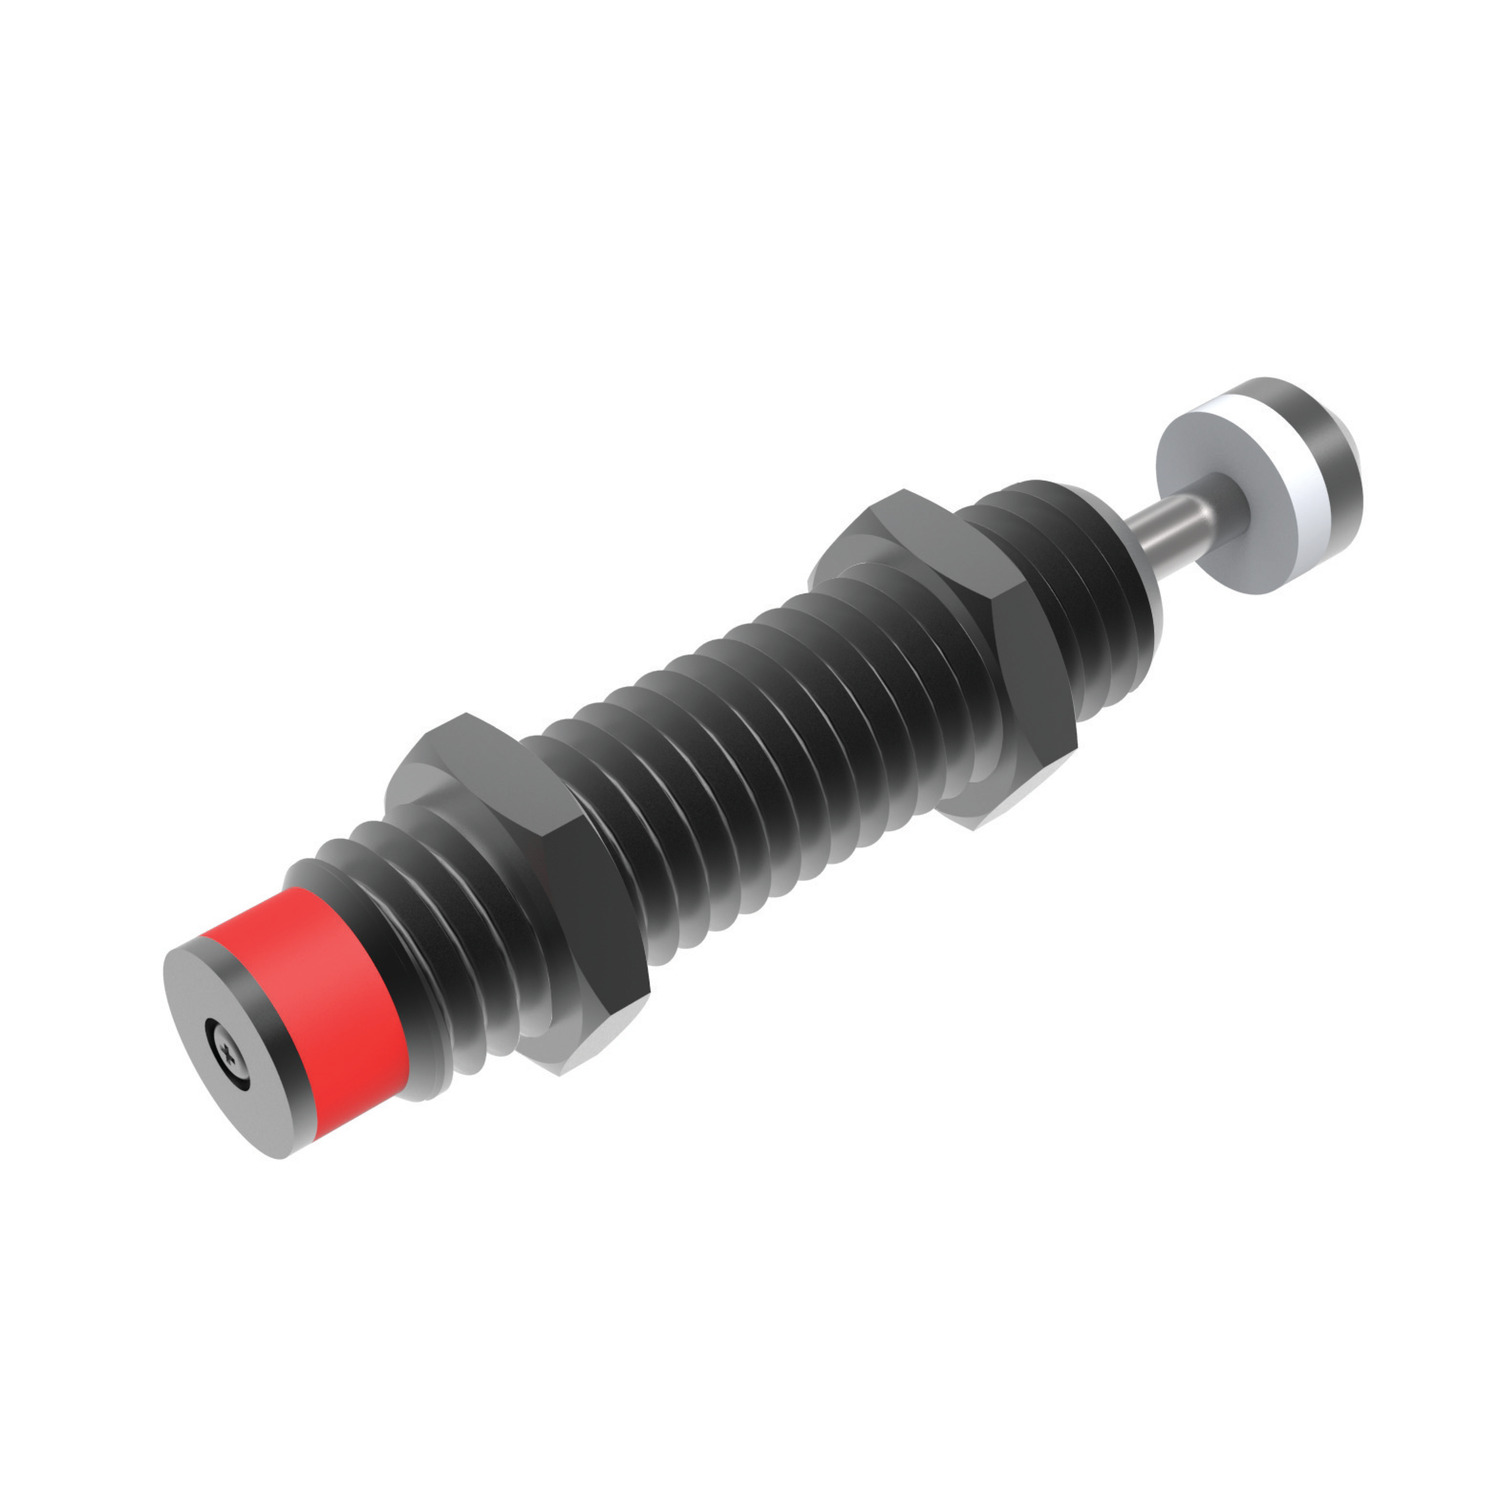 Minature Shock Absorbers, Self Compensating Adjustable collar at base of shock absorber enables setting of optimum deceleration of unit to suit application. Ensures smooth deceleration of moving parts.